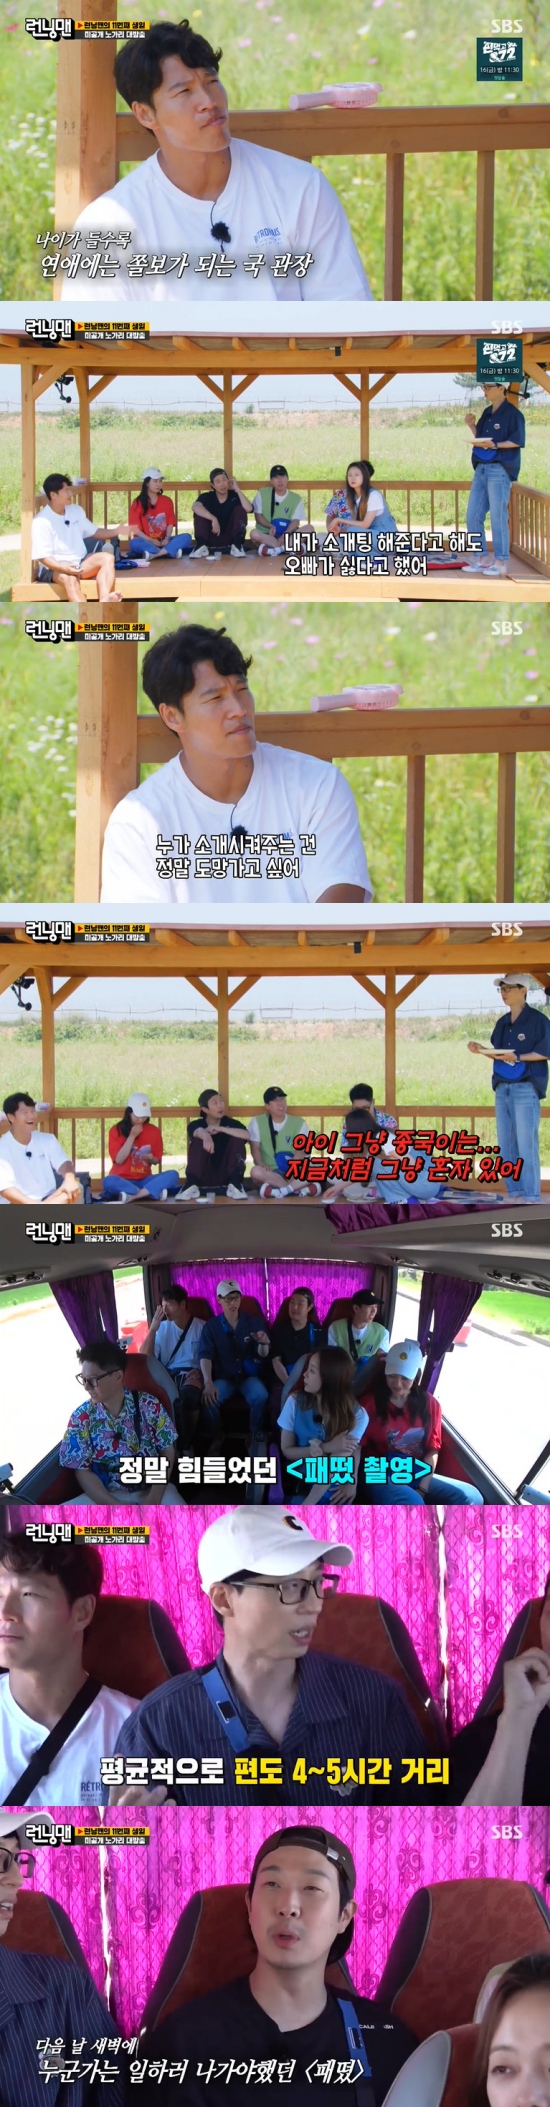 On SBS Running Man broadcasted on the 11th, We Gon Be Alright Day Race was broadcast on the scene.On this day, the production team released We Gon Be Alright Day Race broadcast last week for viewers who had a hot reaction.Among them, Yang Se-chan and Kim Jong-kook revealed the burden of marriage. (Ive been without my girlfriend for over two years, Im told to introduce you, but Im a lot of it, Yang Se-chan said.Ji Suk-jin advised, Meet a lot when you want to meet everyone, and when you get married, you have to be faithful to your family. You have to meet a lot of people to recognize someone who will spend your life with you.Kim Jong-kook confessed, It is scary to meet someone at my age. Jeon So-min said, I did not want to introduce it.Kim Jong-kook said, I want to run away from introducing it, and Haha suggested, Meet the subscriber on the Jim Jong Kook channel.Kim Jong-kook showed a passive attitude, saying, It will happen if you look at something. Yoo Jae-Suk said, Just stay alone like now.I enjoy my life, she said.He also talked about The Family Out (hereinafter referred to as a squash), and Yoo Jae-Suk said, Now I talk, but a squash is tired as I go.Im going to go four hours, five hours, he recalled.Kim Jong-kook said, I am so hungry before making dinner, and Haha said, Is not there anything going to dawn?When I picked it, the viewer was chewy. Yoo Jae-Suk lamented, Everyone turned away later, and Kim Jong-kook said, If it takes until dawn and morning, you can see that you sleep for an hour or two.So I did so much rice, I couldnt do it longer than I thought, because it was hard, Yoo Jae-Suk added.In particular, Yoo Jae-Suk said, The funny back story is that we have a one-night and two-day trip, so there is nothing to do with the manager and staff.The manager and stylists favorite shooting is going to be one night and two days. Further, Song Ji-hyo said: It was really hard - strange and nervous and dressed as a ghost at night.I have to hide, but I have fallen asleep, said Yoo Jae-Suk, who said, So I was rumored to be a good personality. Ji Hyo just slept.Photo = SBS broadcast screen